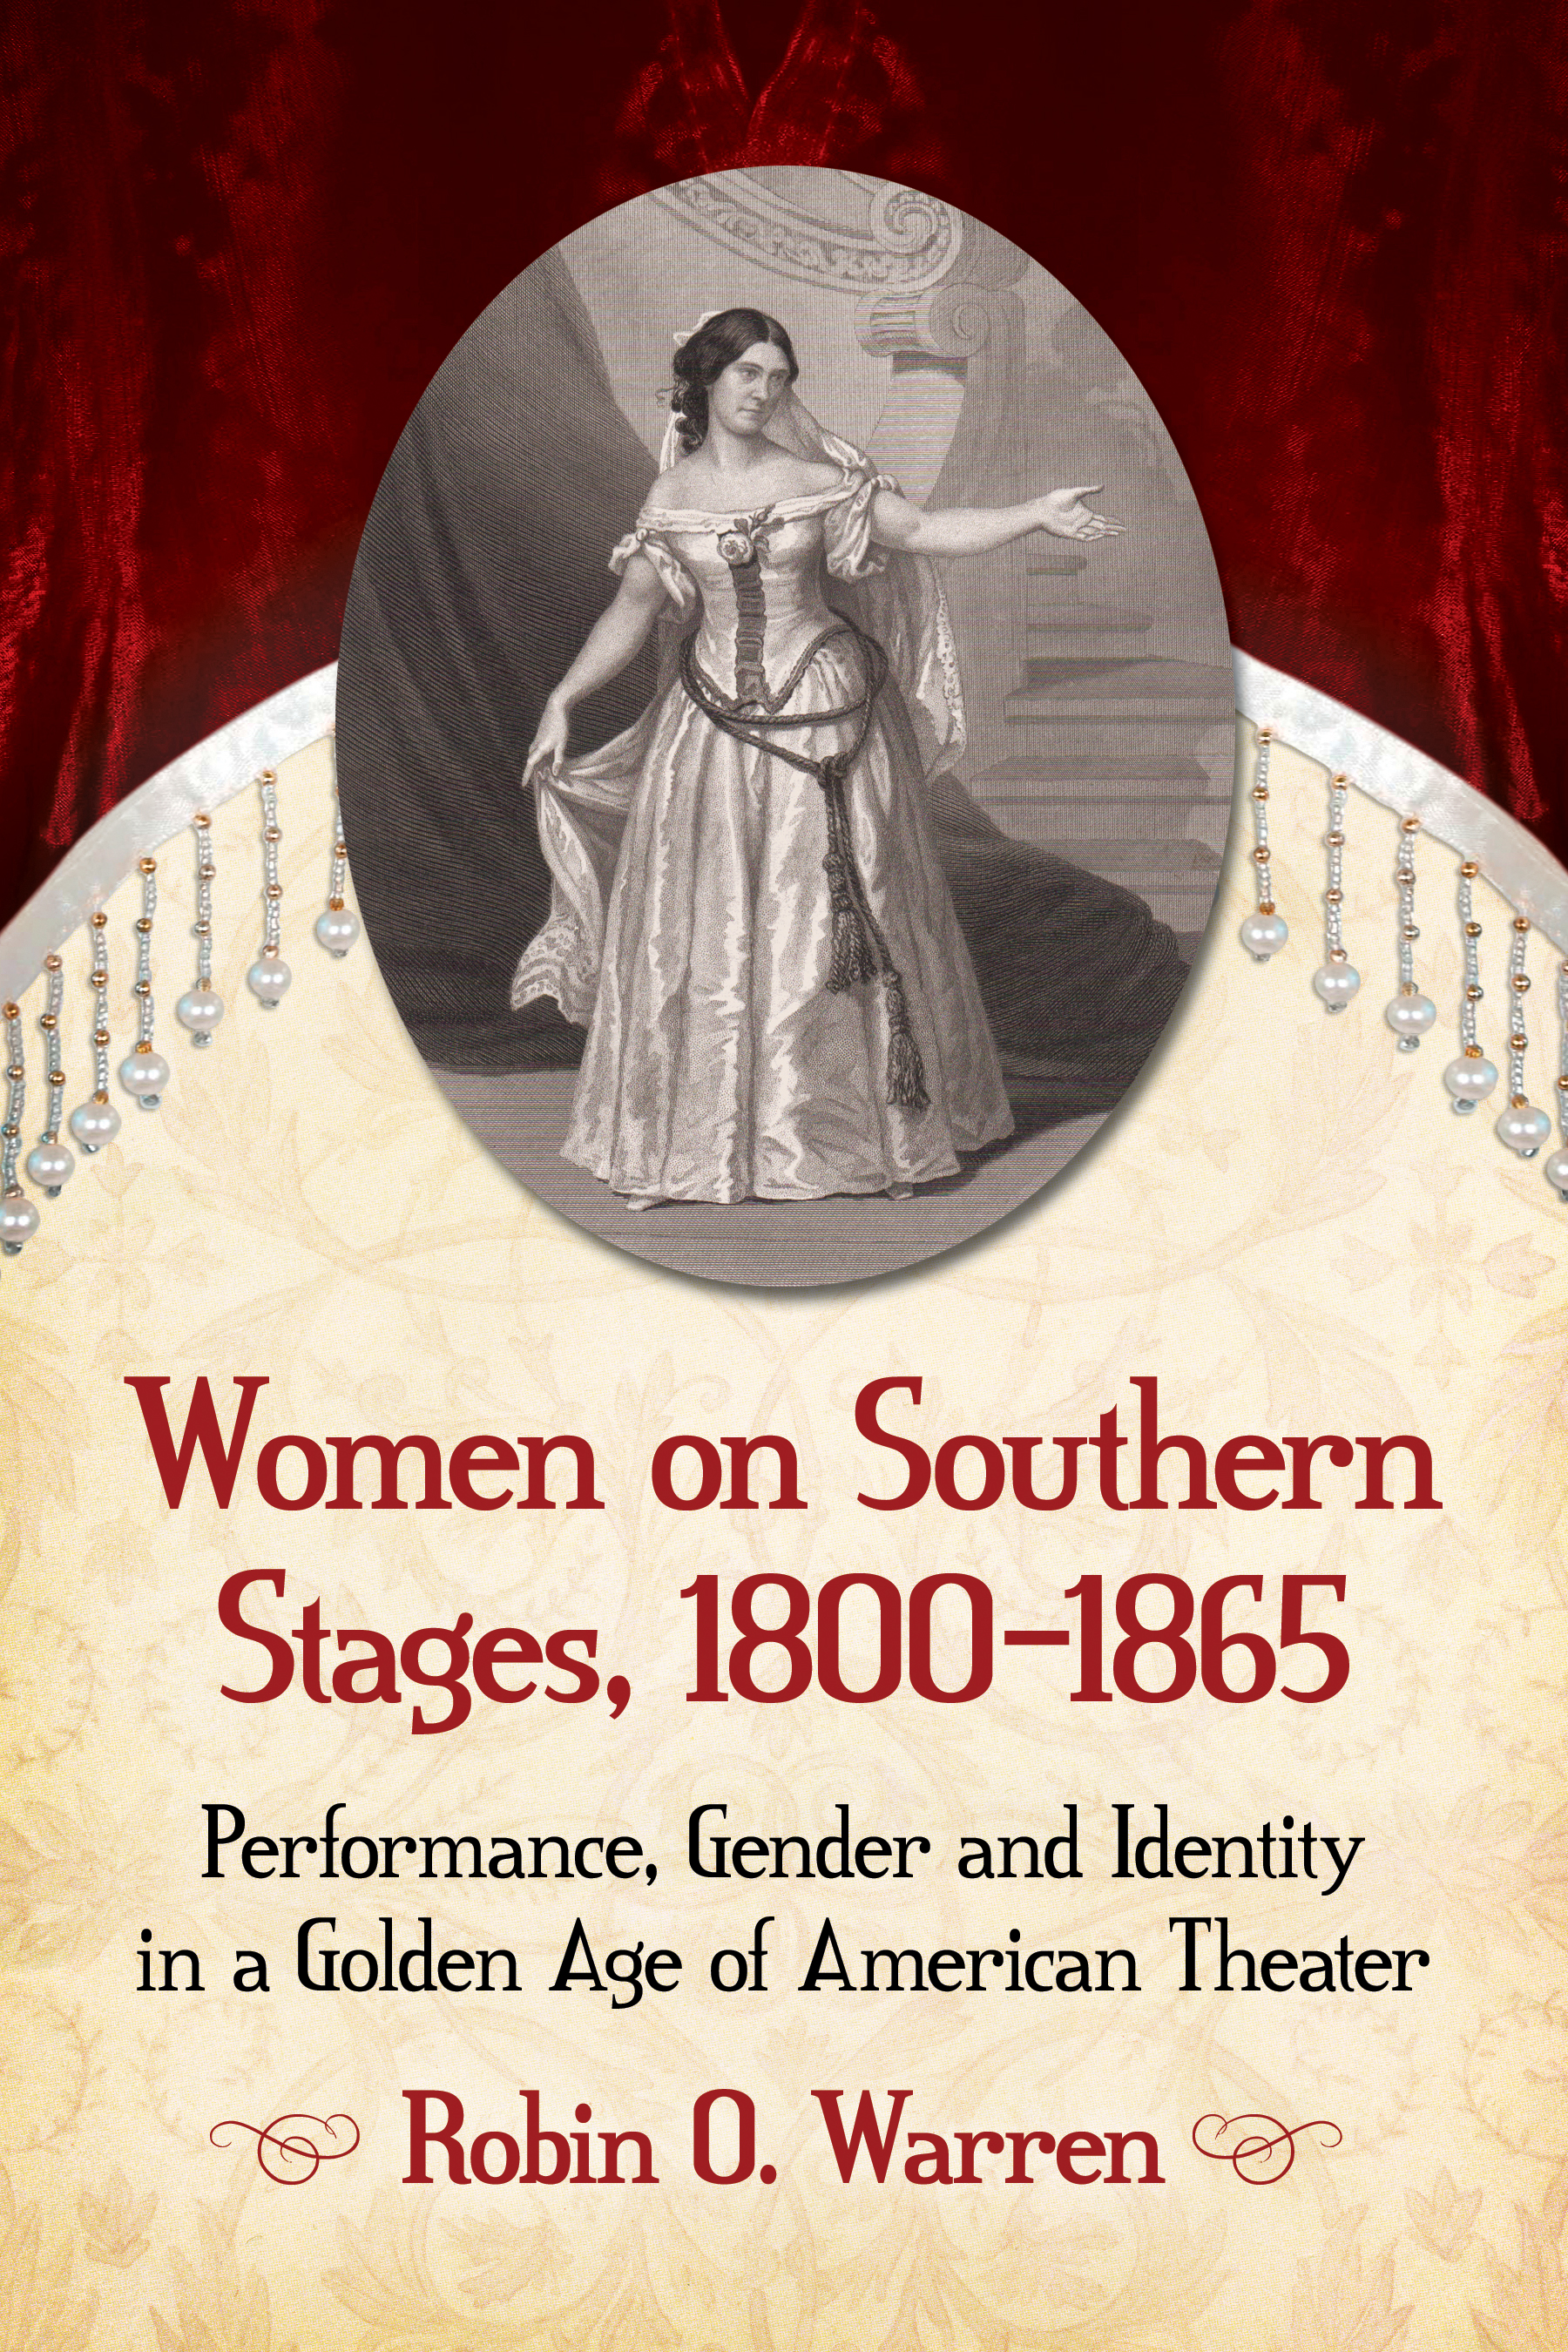 Women on Southern Stages 1800-1865 Performance Gender and Identity in a Golden Age of American Theater - image 1